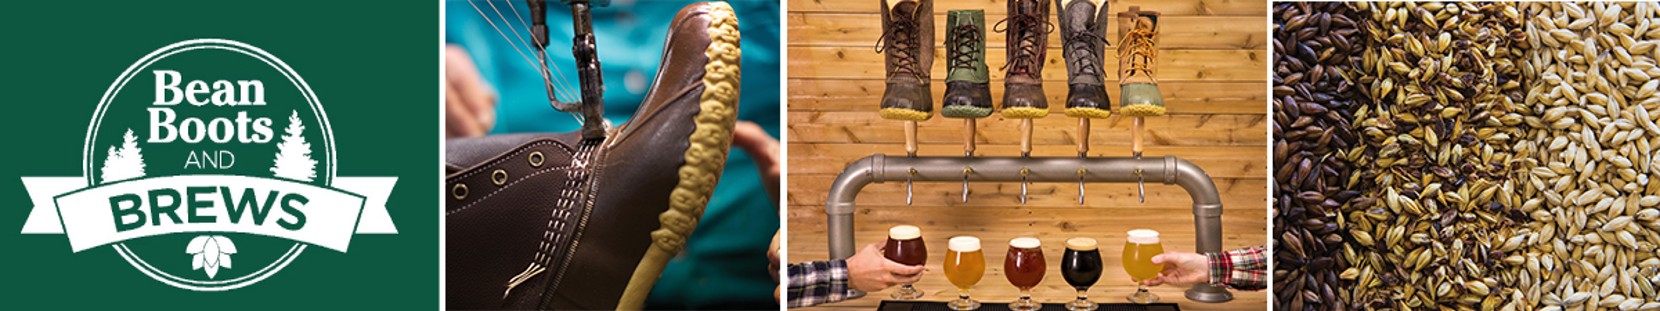 L.L.Bean Launches “Bean Boots and Brews” Collaboration with Maine Craft Brewers